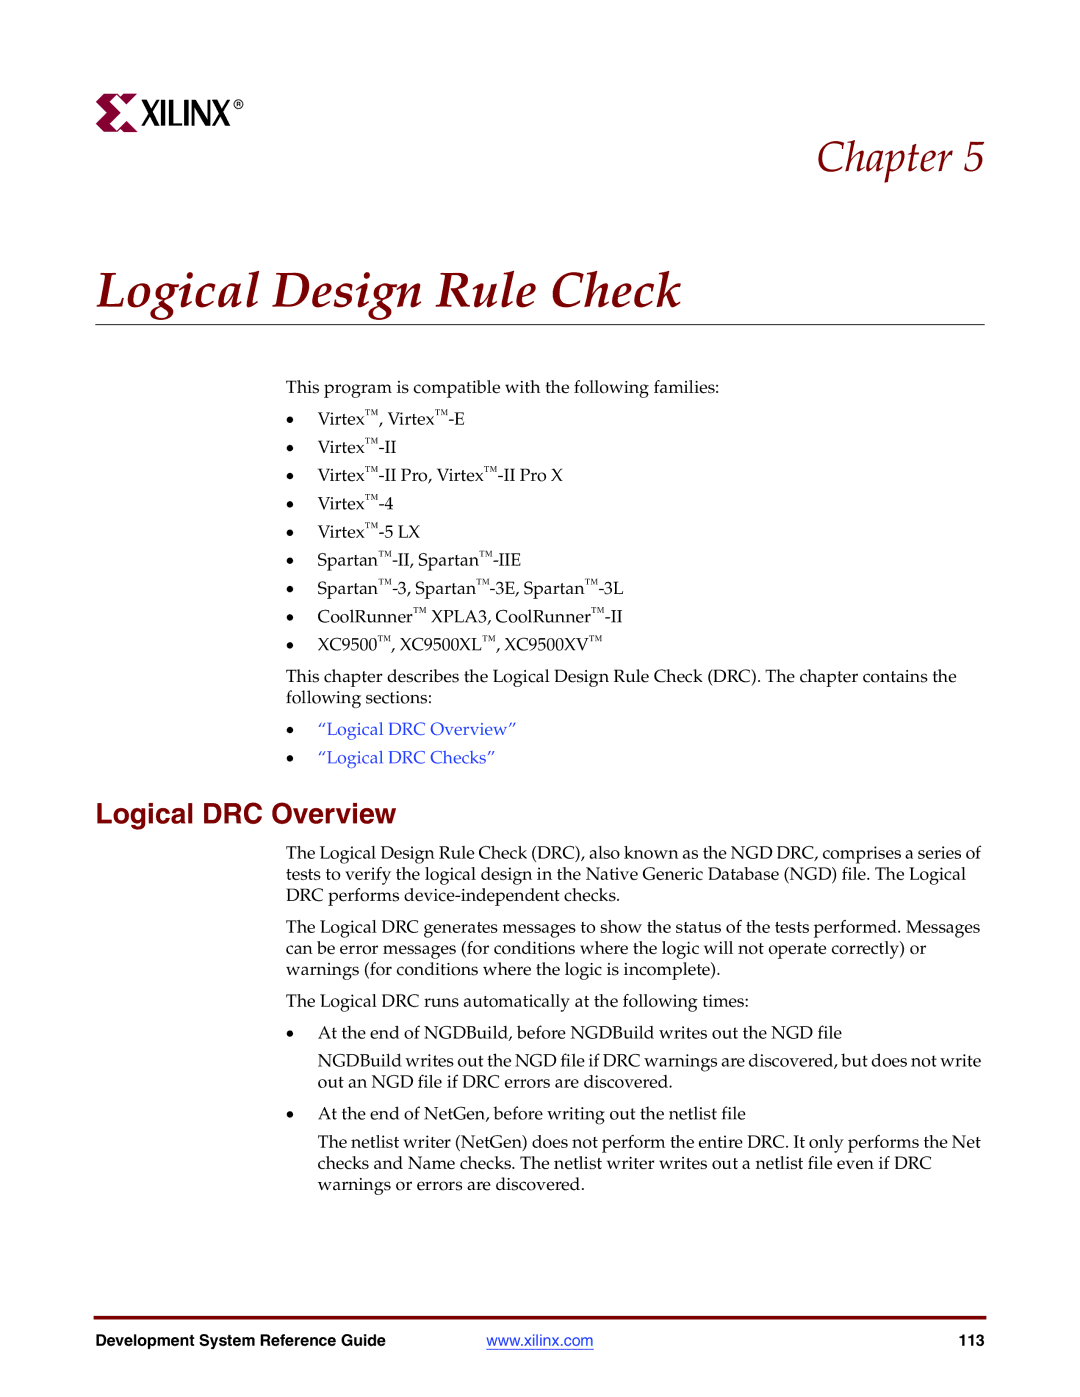 Xilinx 8.2i manual Logical Design Rule Check, Logical DRC Overview 